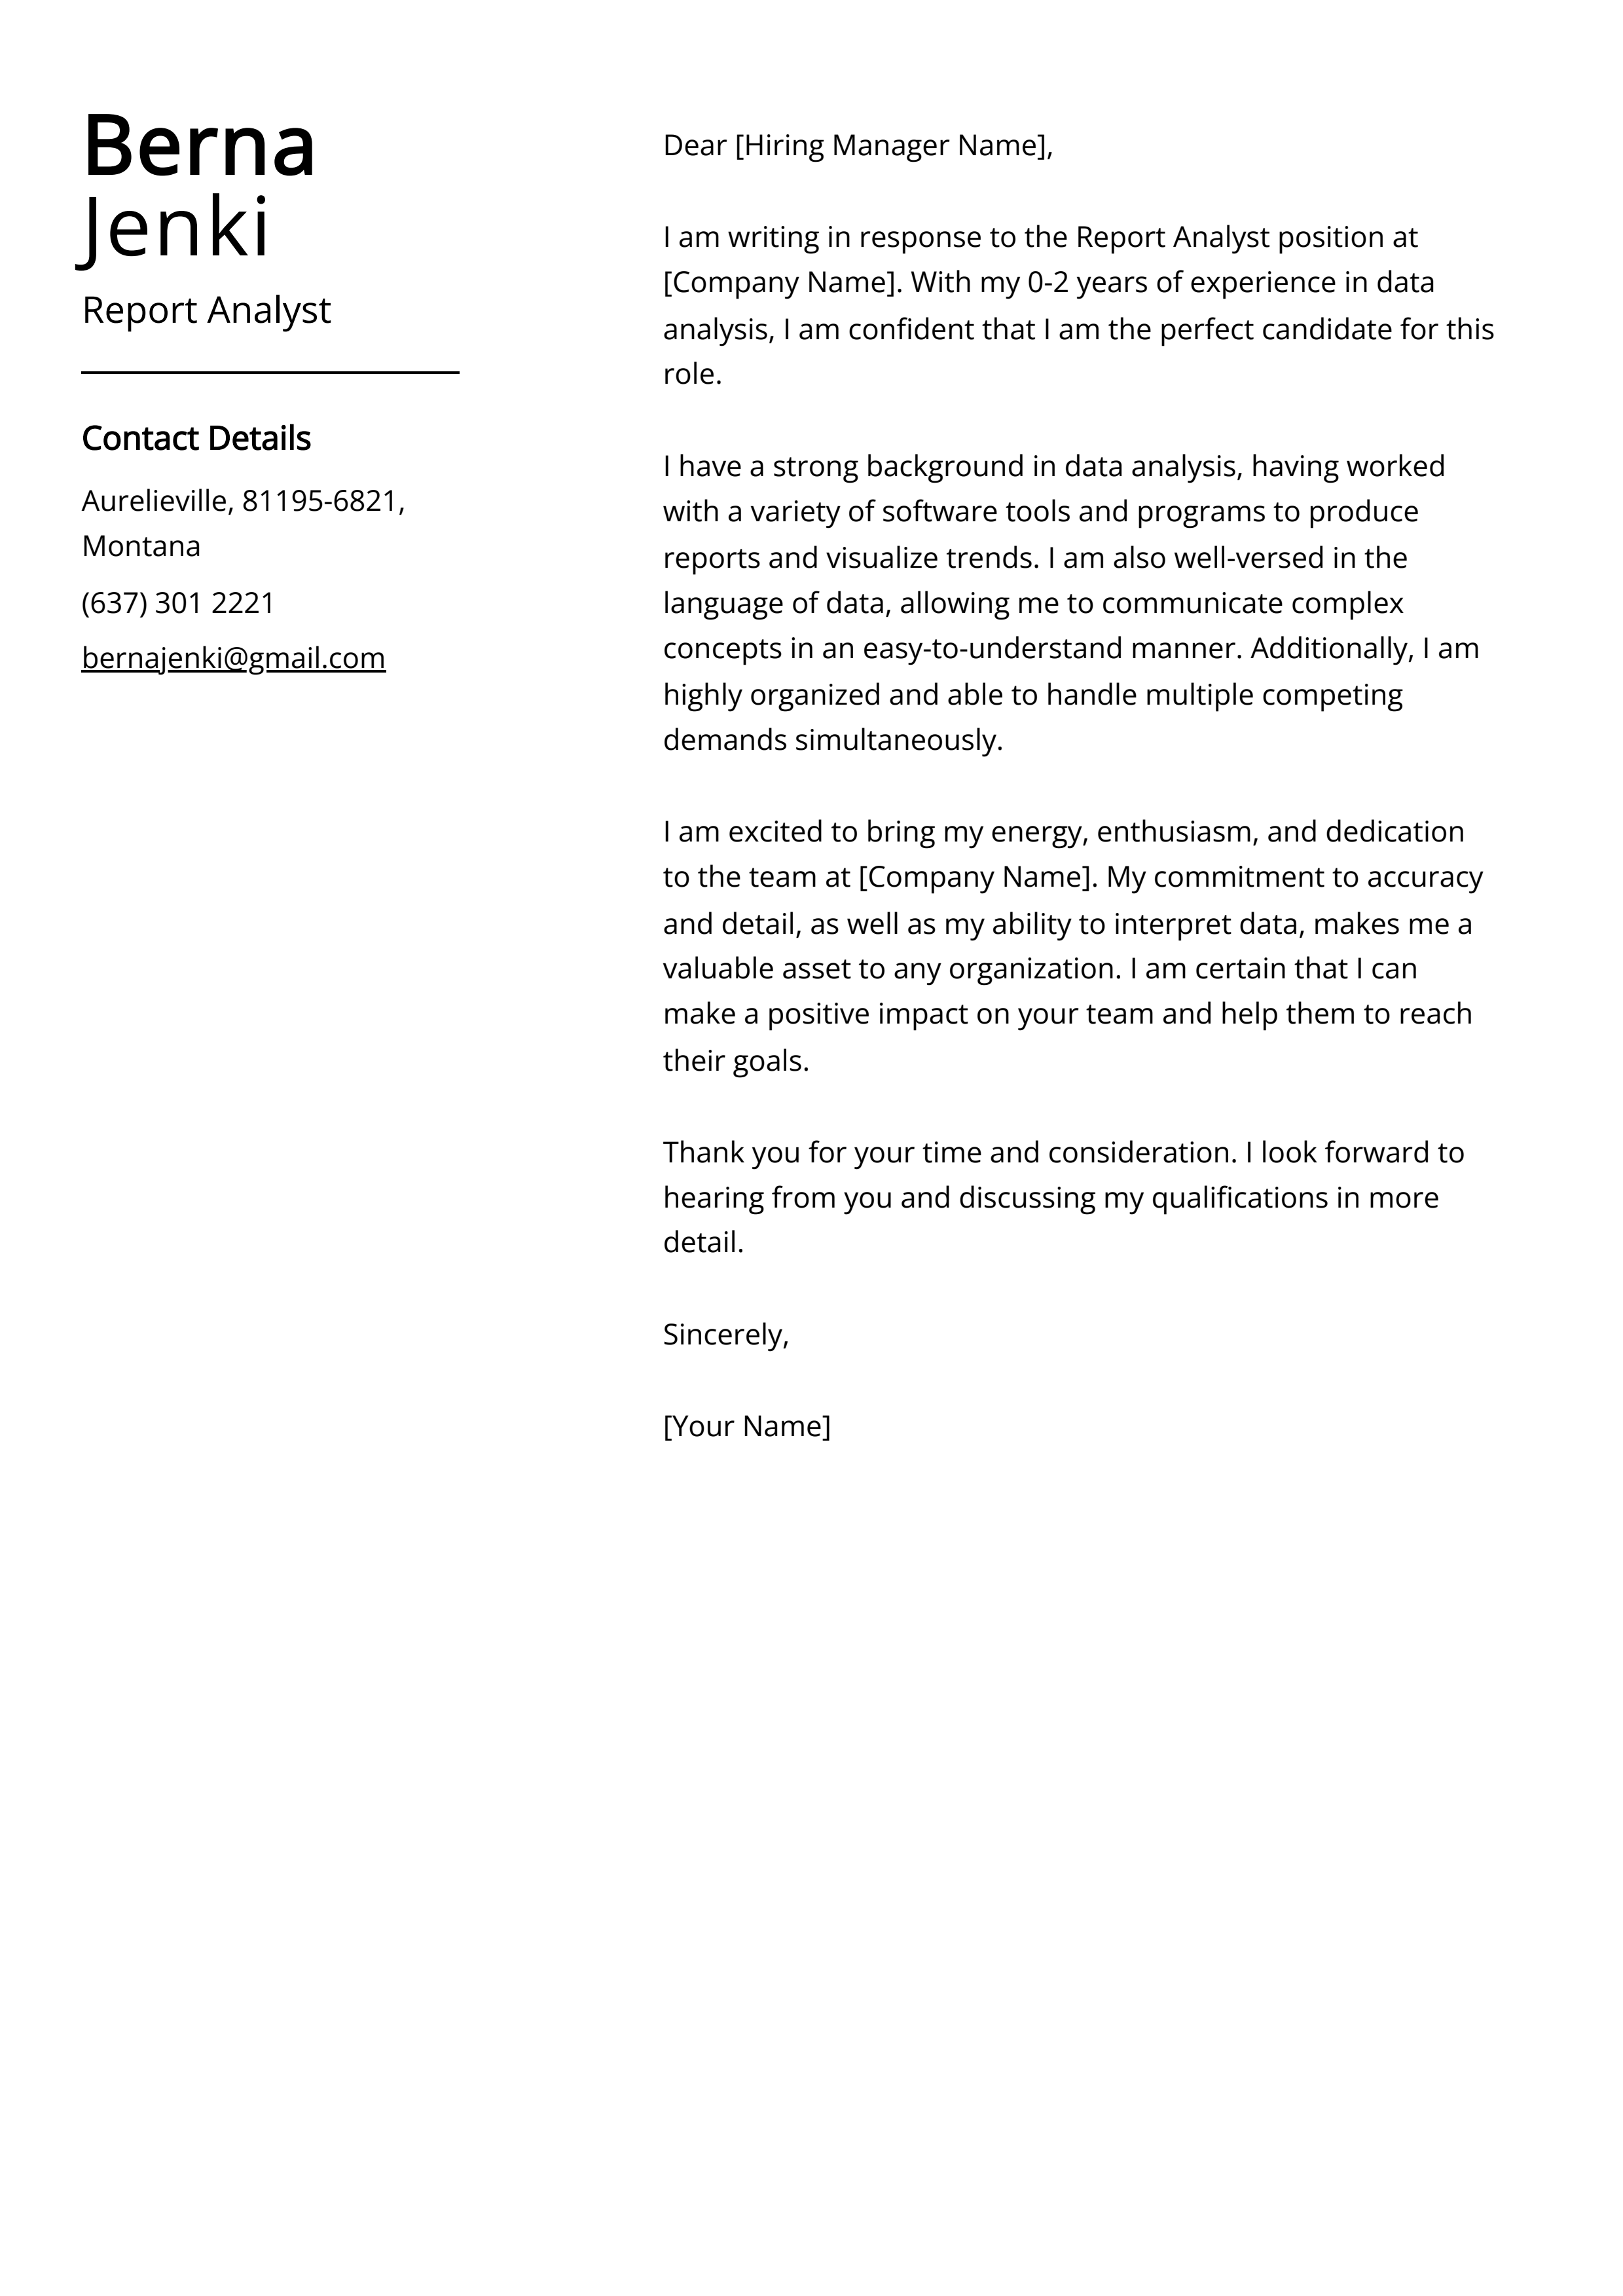 Report Analyst Cover Letter Example